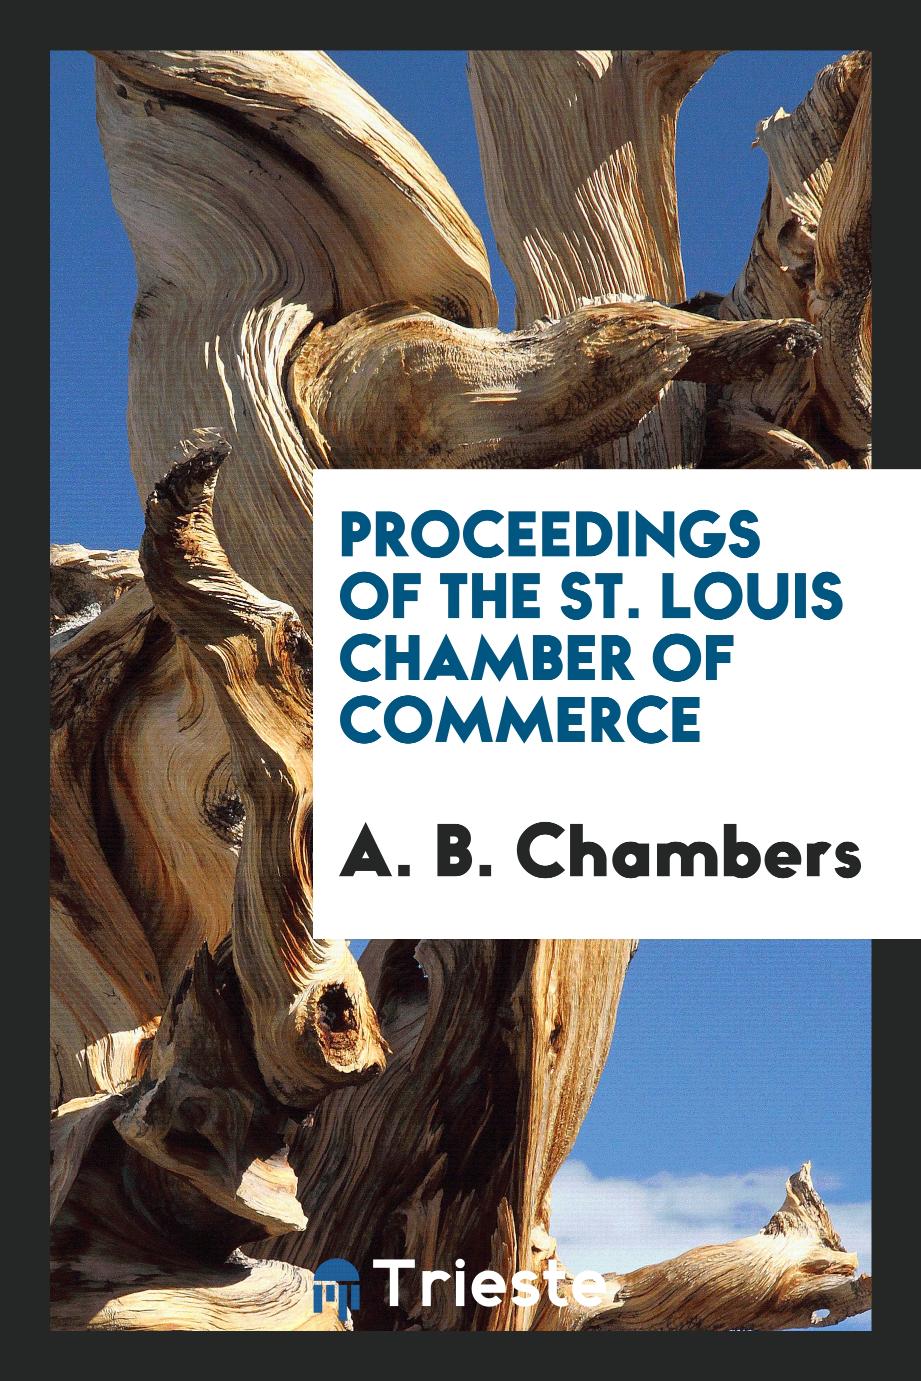 Proceedings of the St. Louis Chamber of Commerce